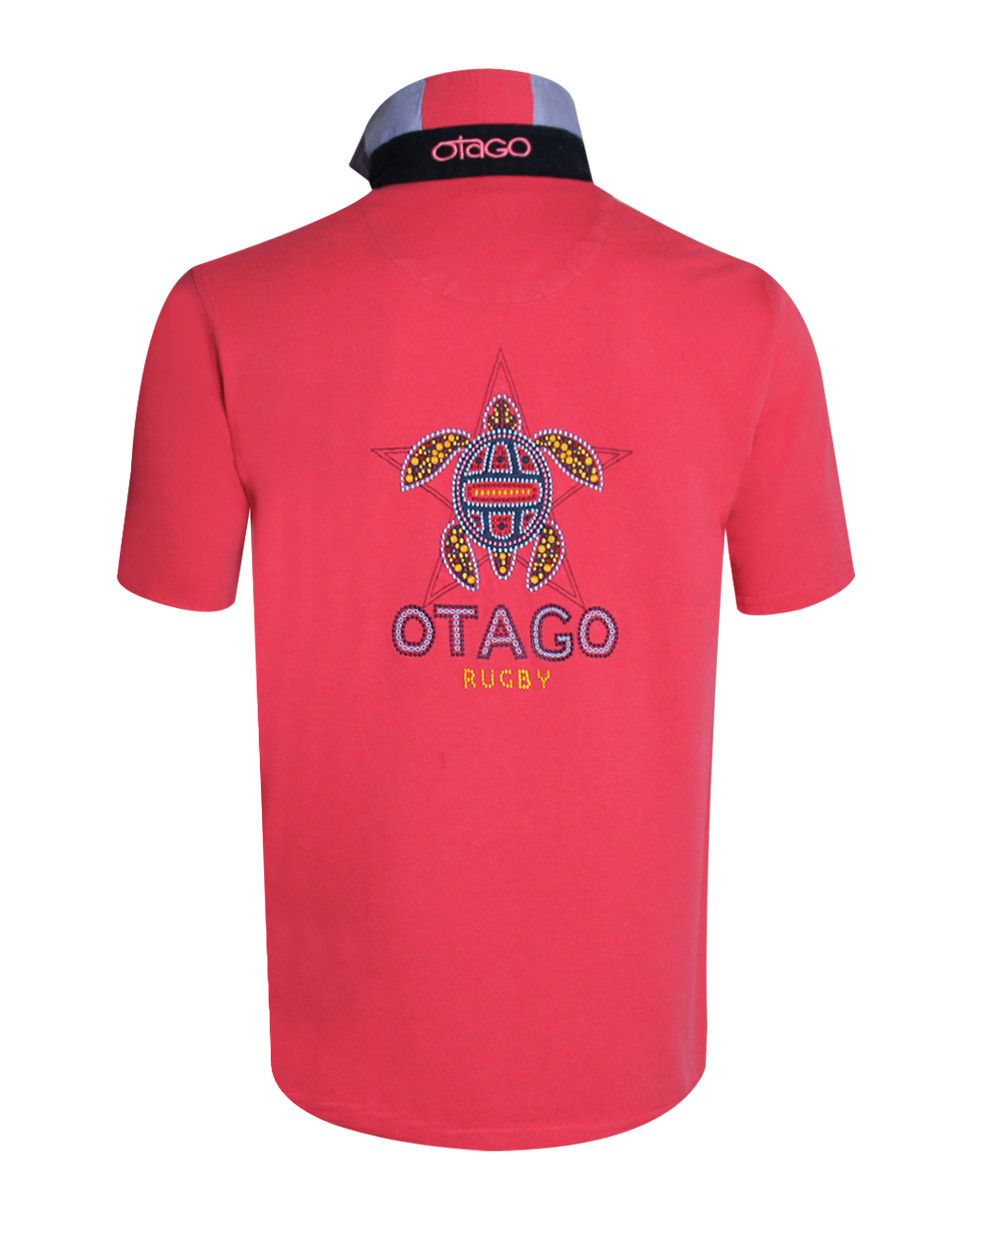 Polo GAUDI manches courtes Otago rugby corail pour homme